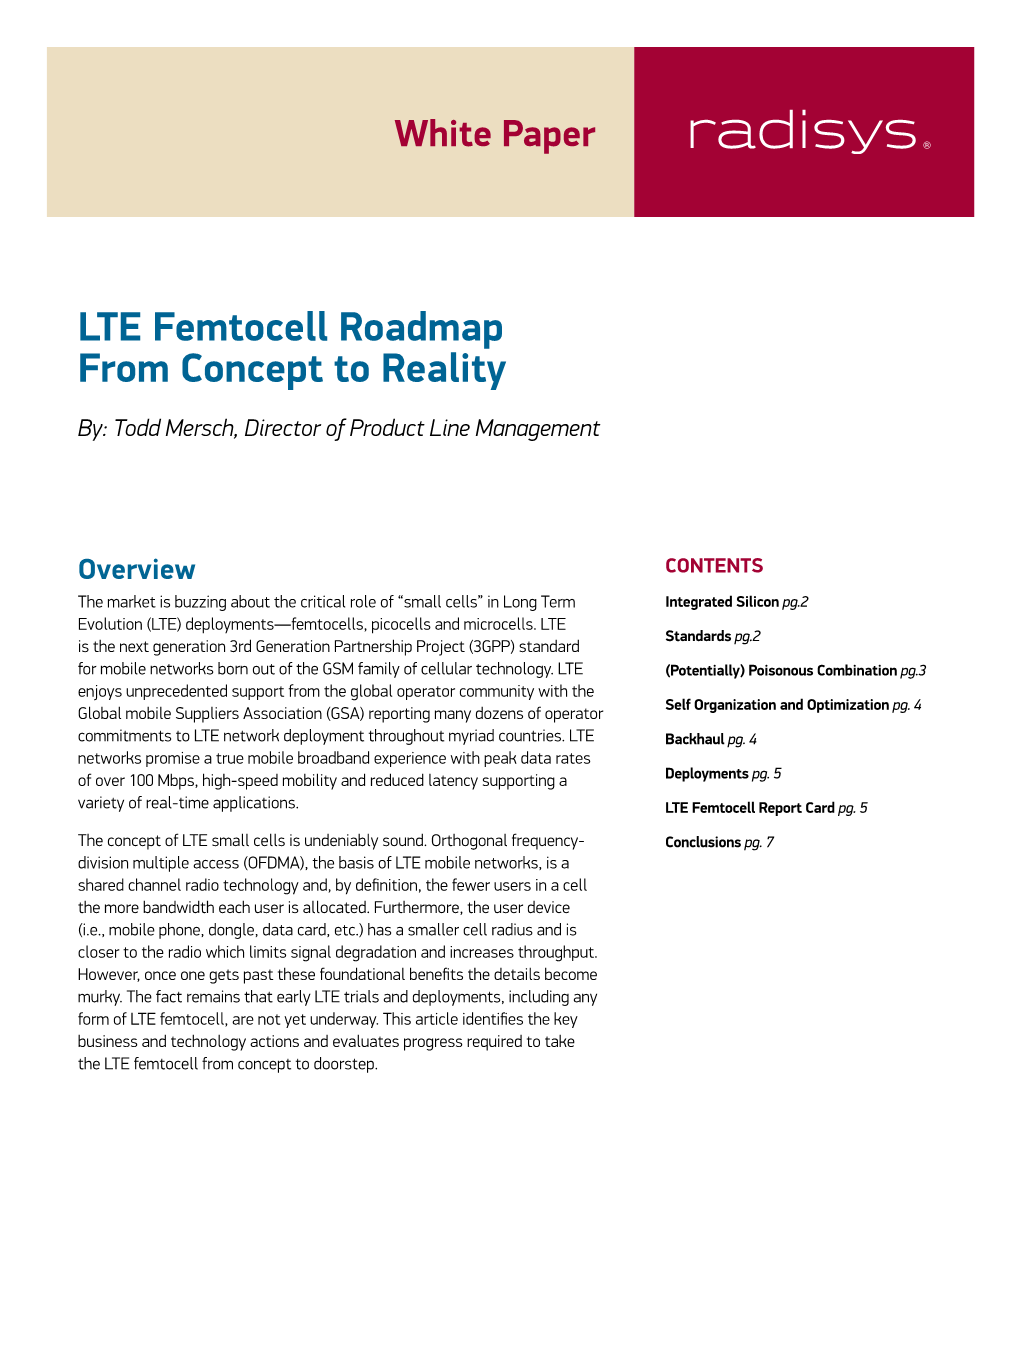 LTE Femtocell Roadmap from Concept to Reality By: Todd Mersch, Director of Product Line Management